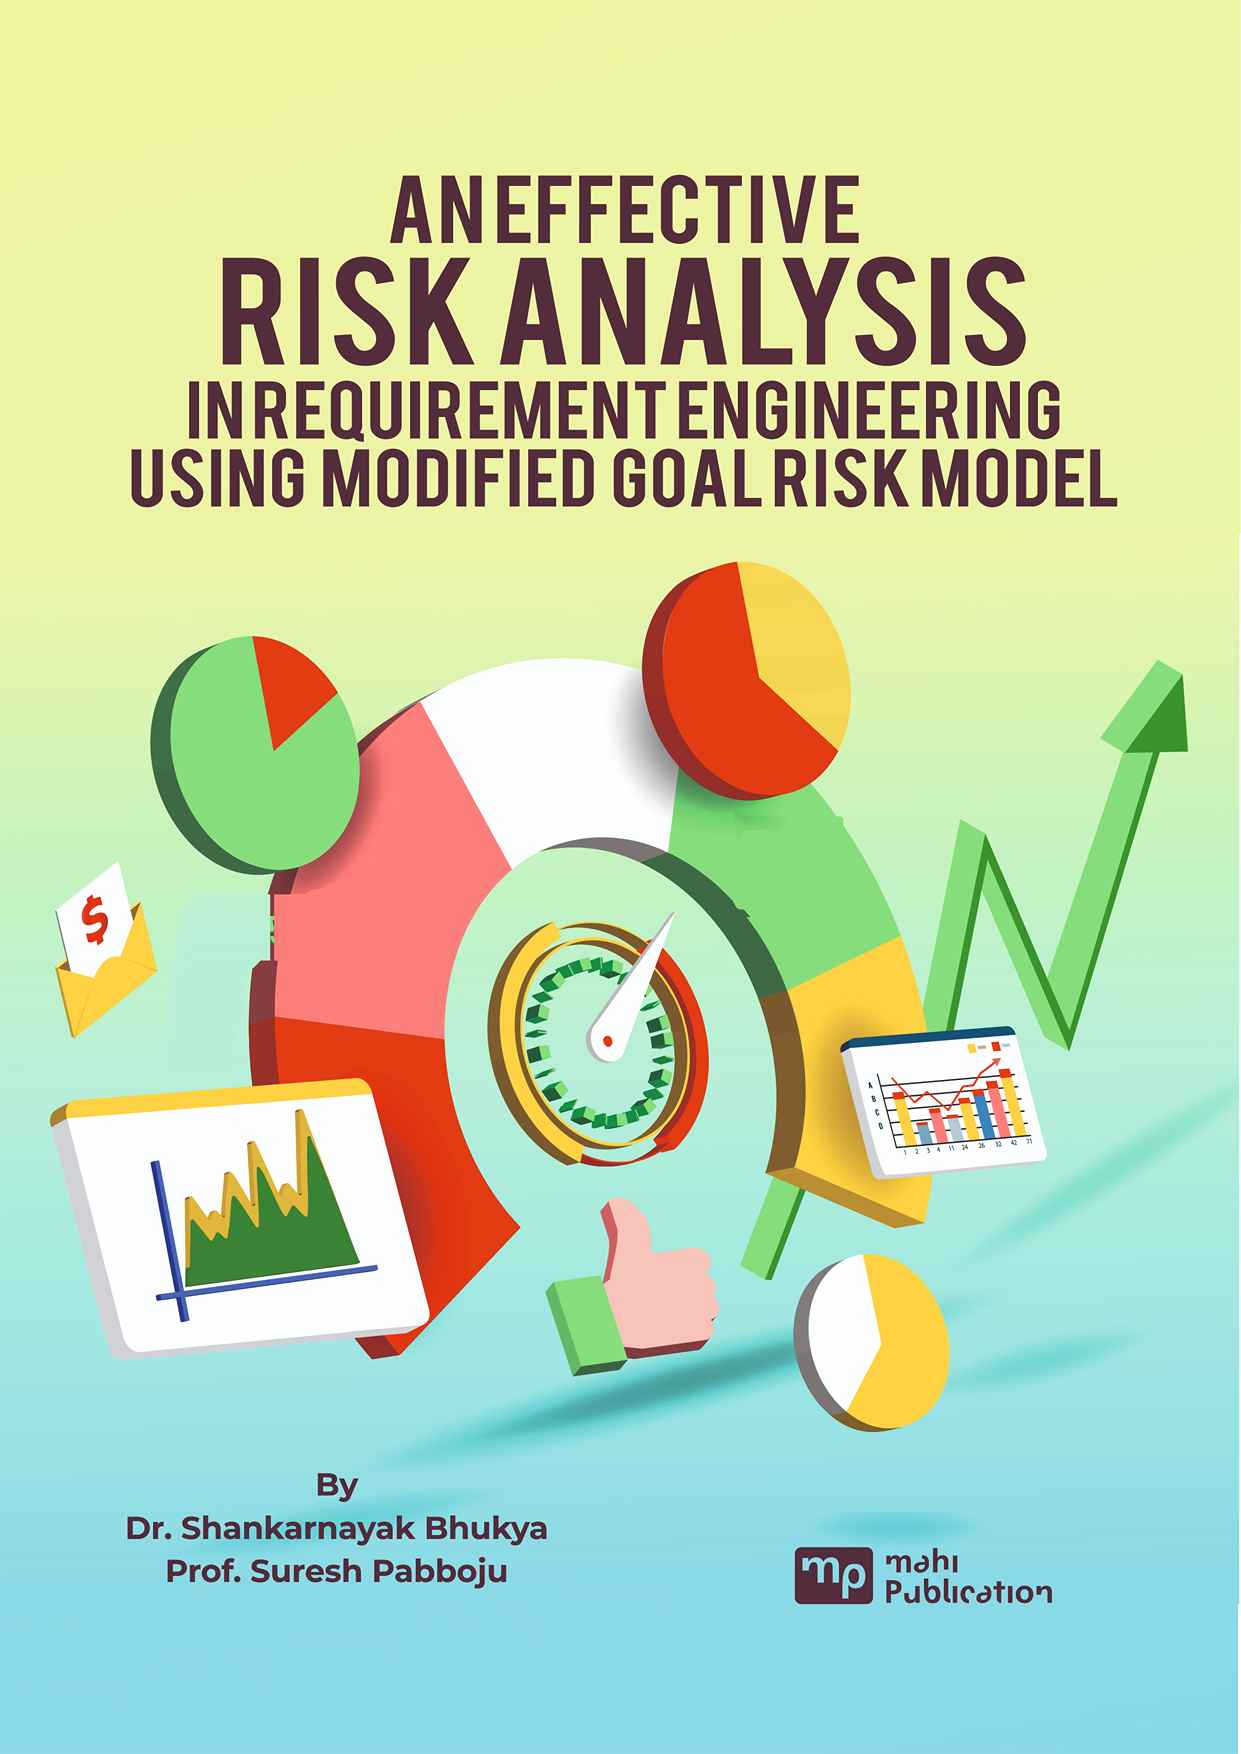 An Effective Risk Analysis in Requirement Engineering using modified Goal Risk Model